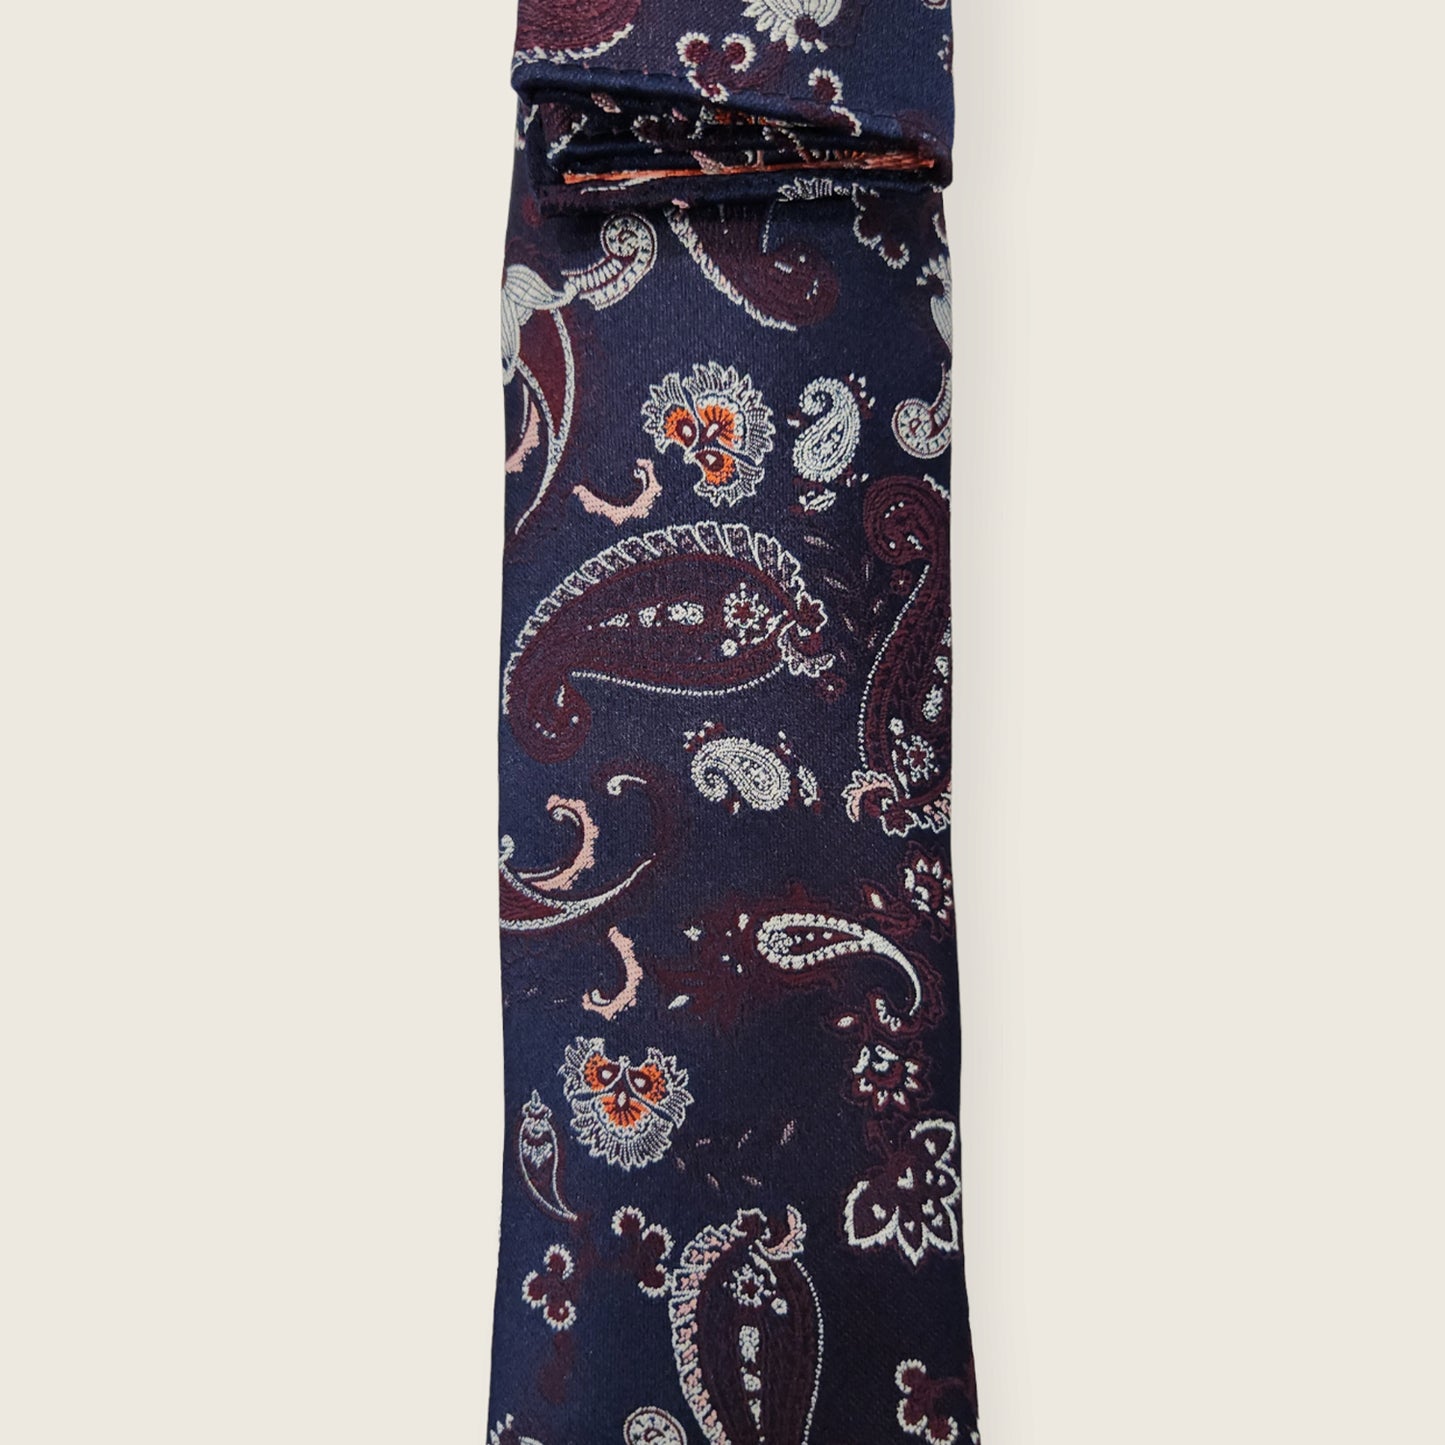 Tie and Hankie Set - Paisley Navy and Burgundy I173116